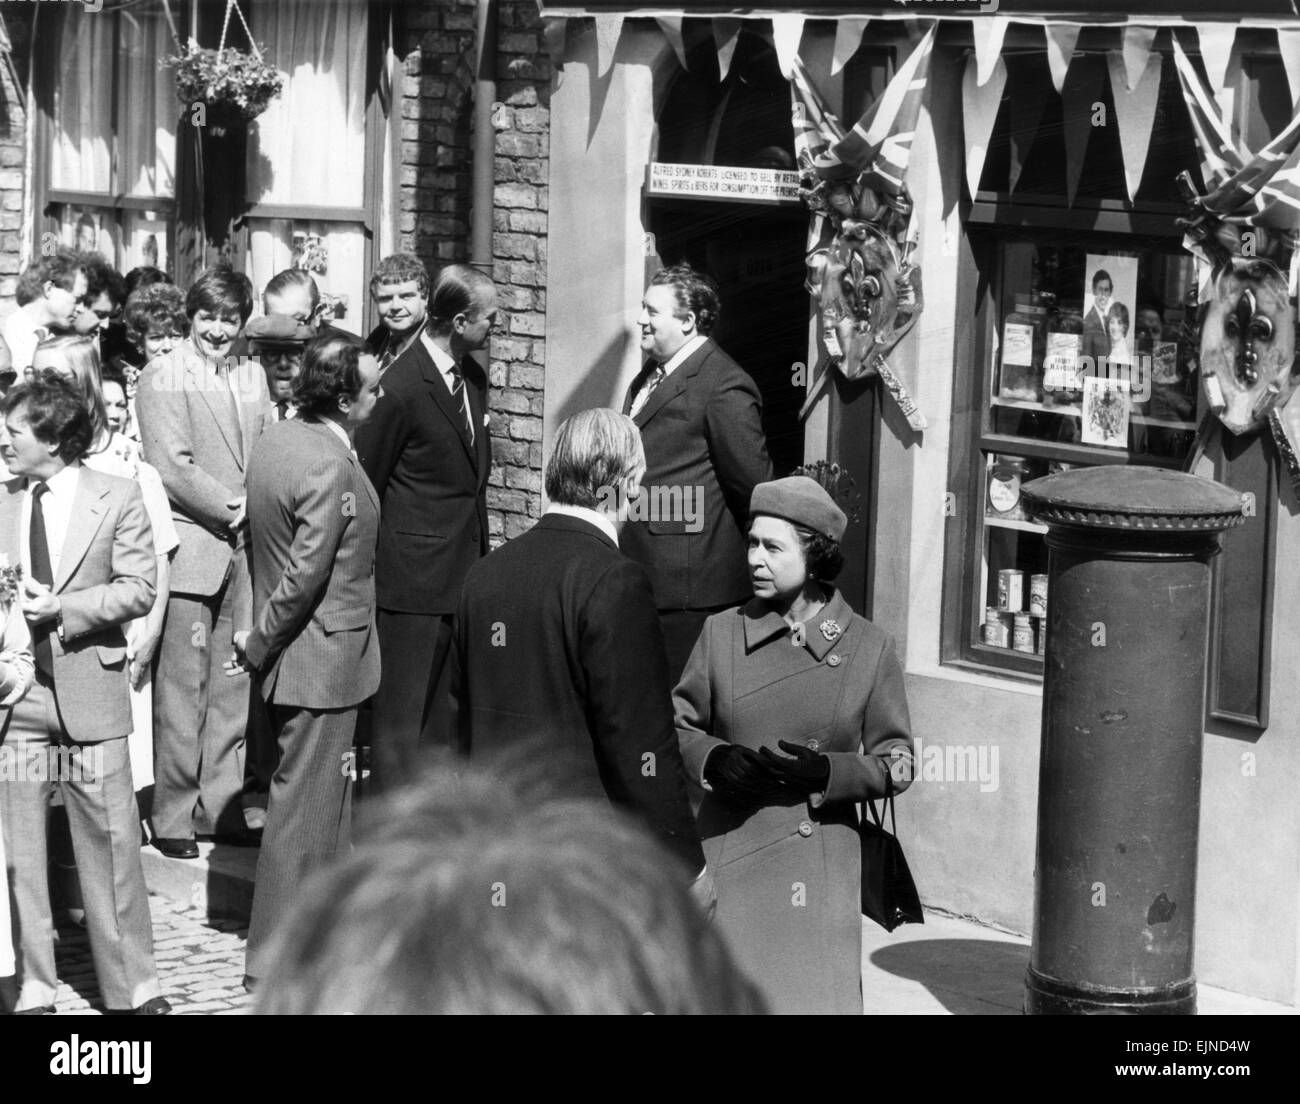 The Queen visits Manchester, 5th May 1982. Set of television programme Coronation Street. Prince Philip. Alf Roberts. Stock Photo